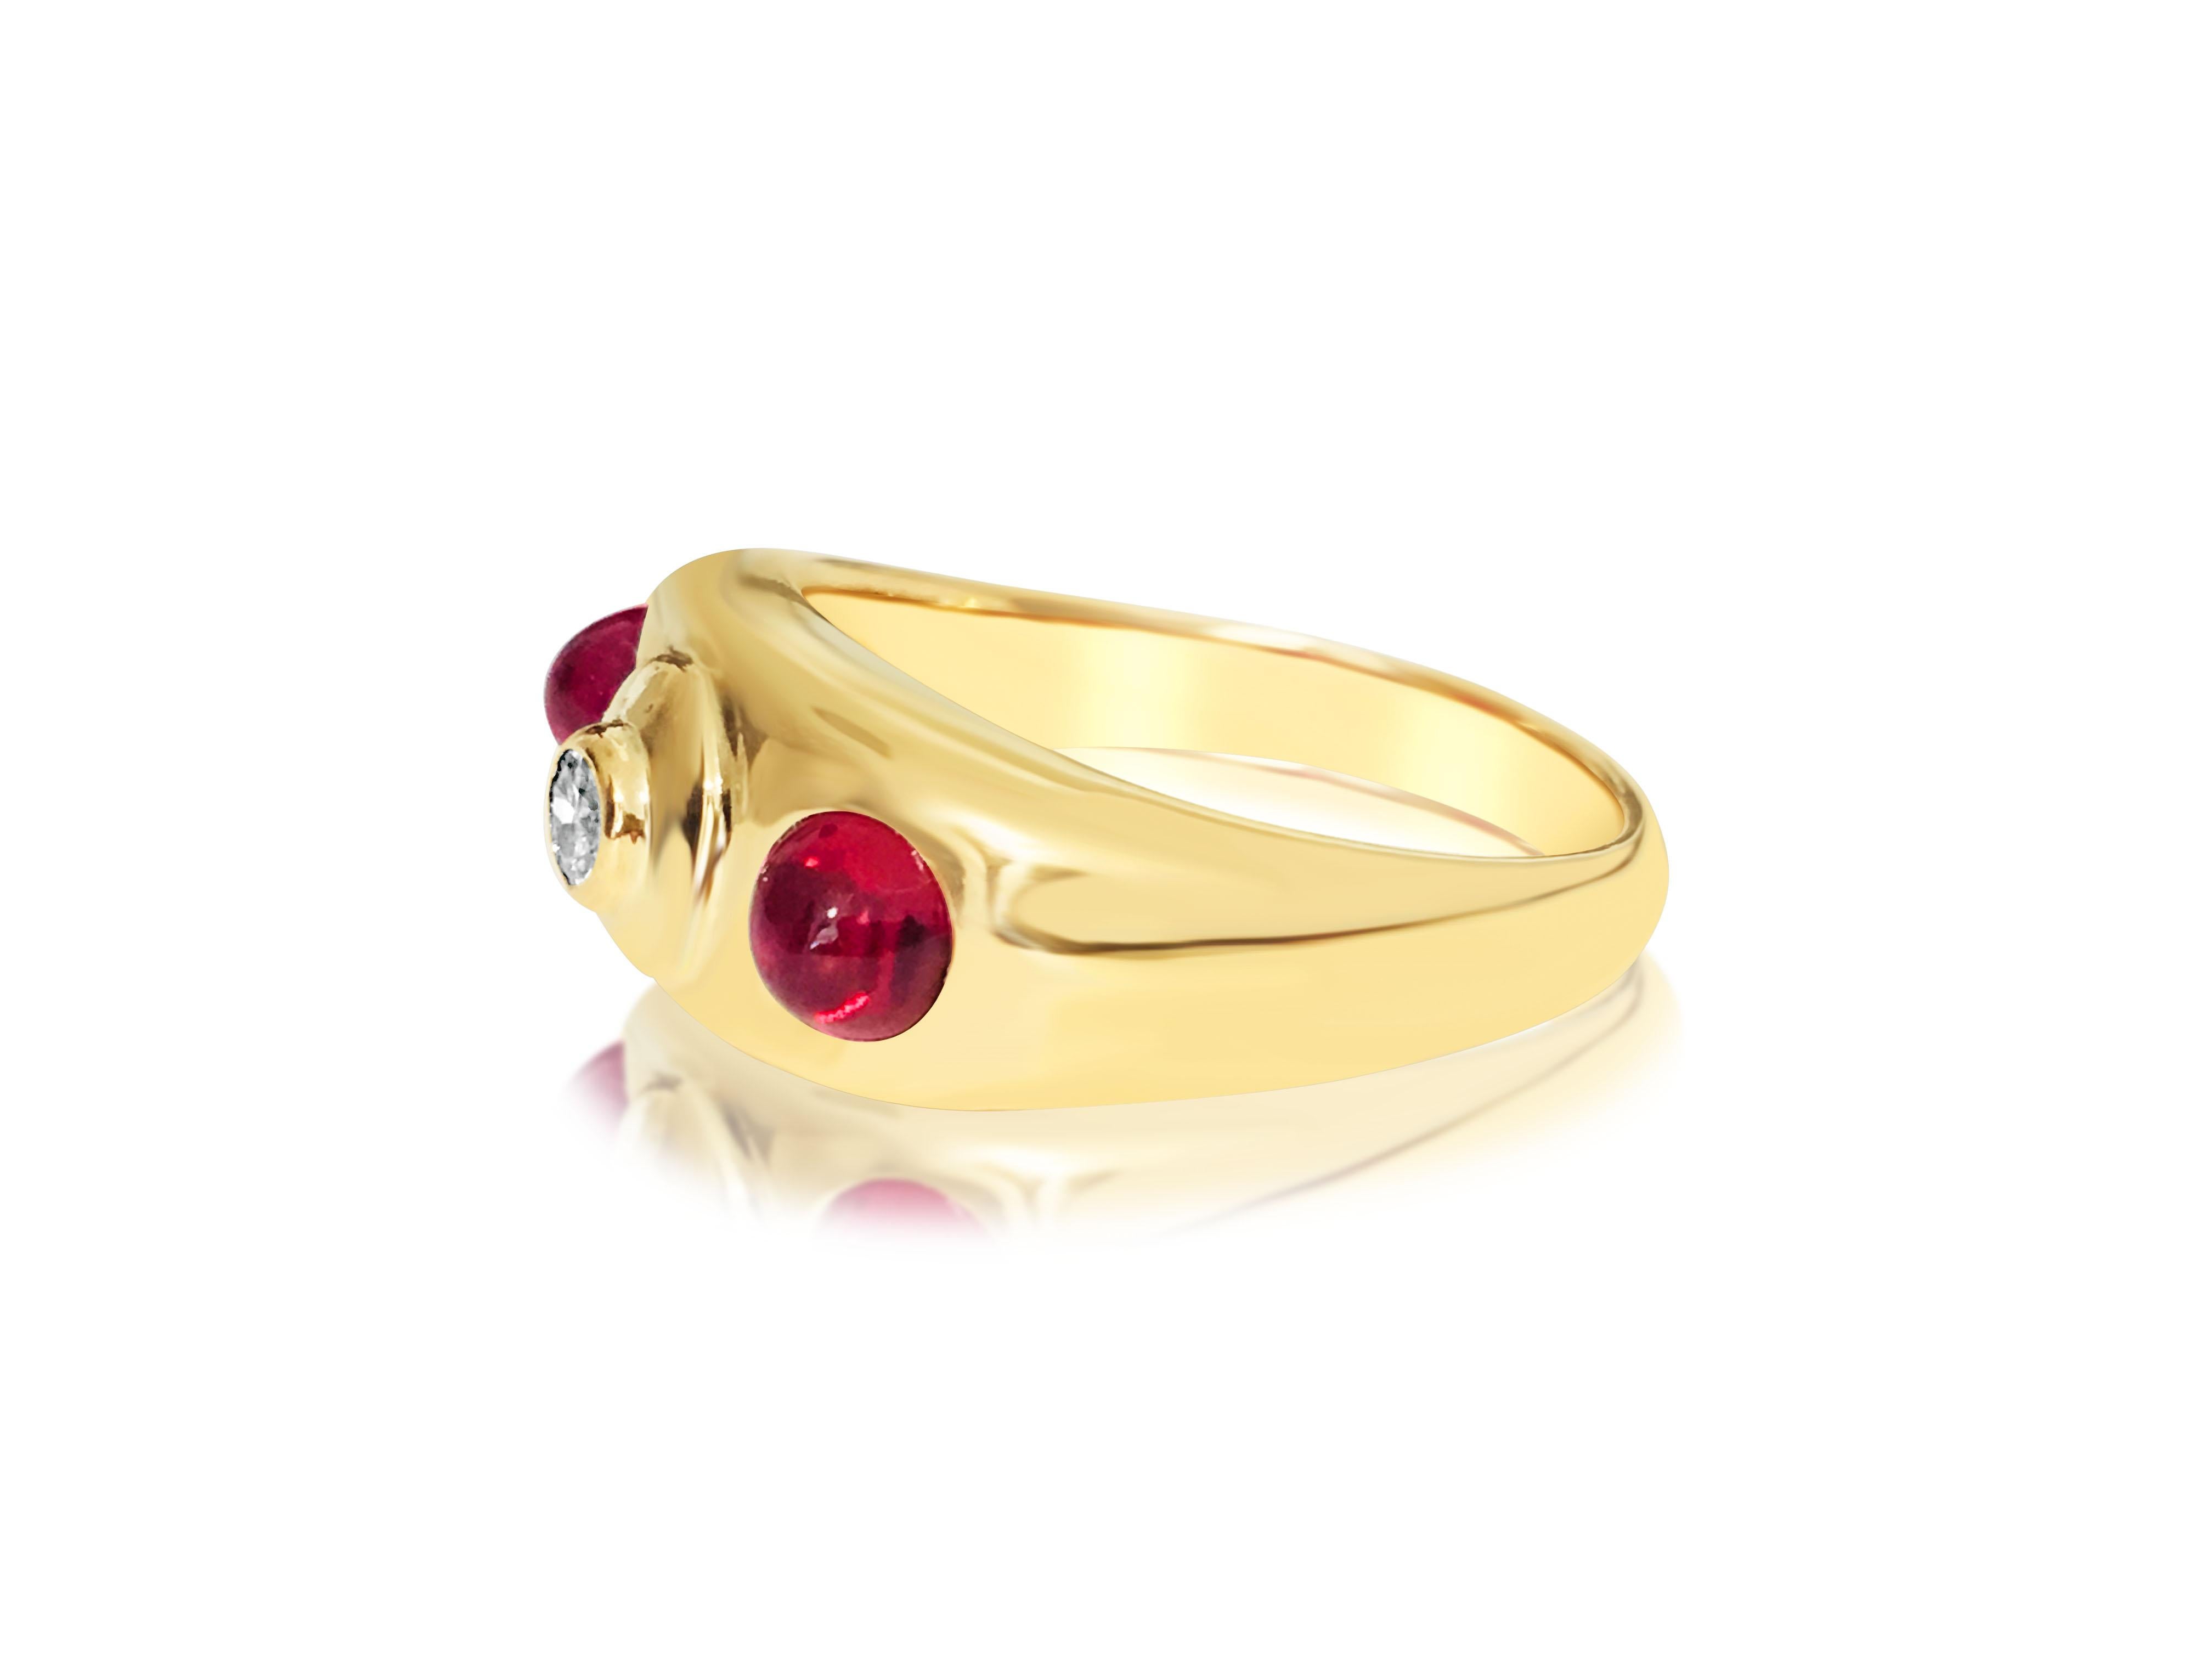 Vintage 14k Gold Ruby Diamond 3 Stone Ring In Excellent Condition For Sale In Miami, FL